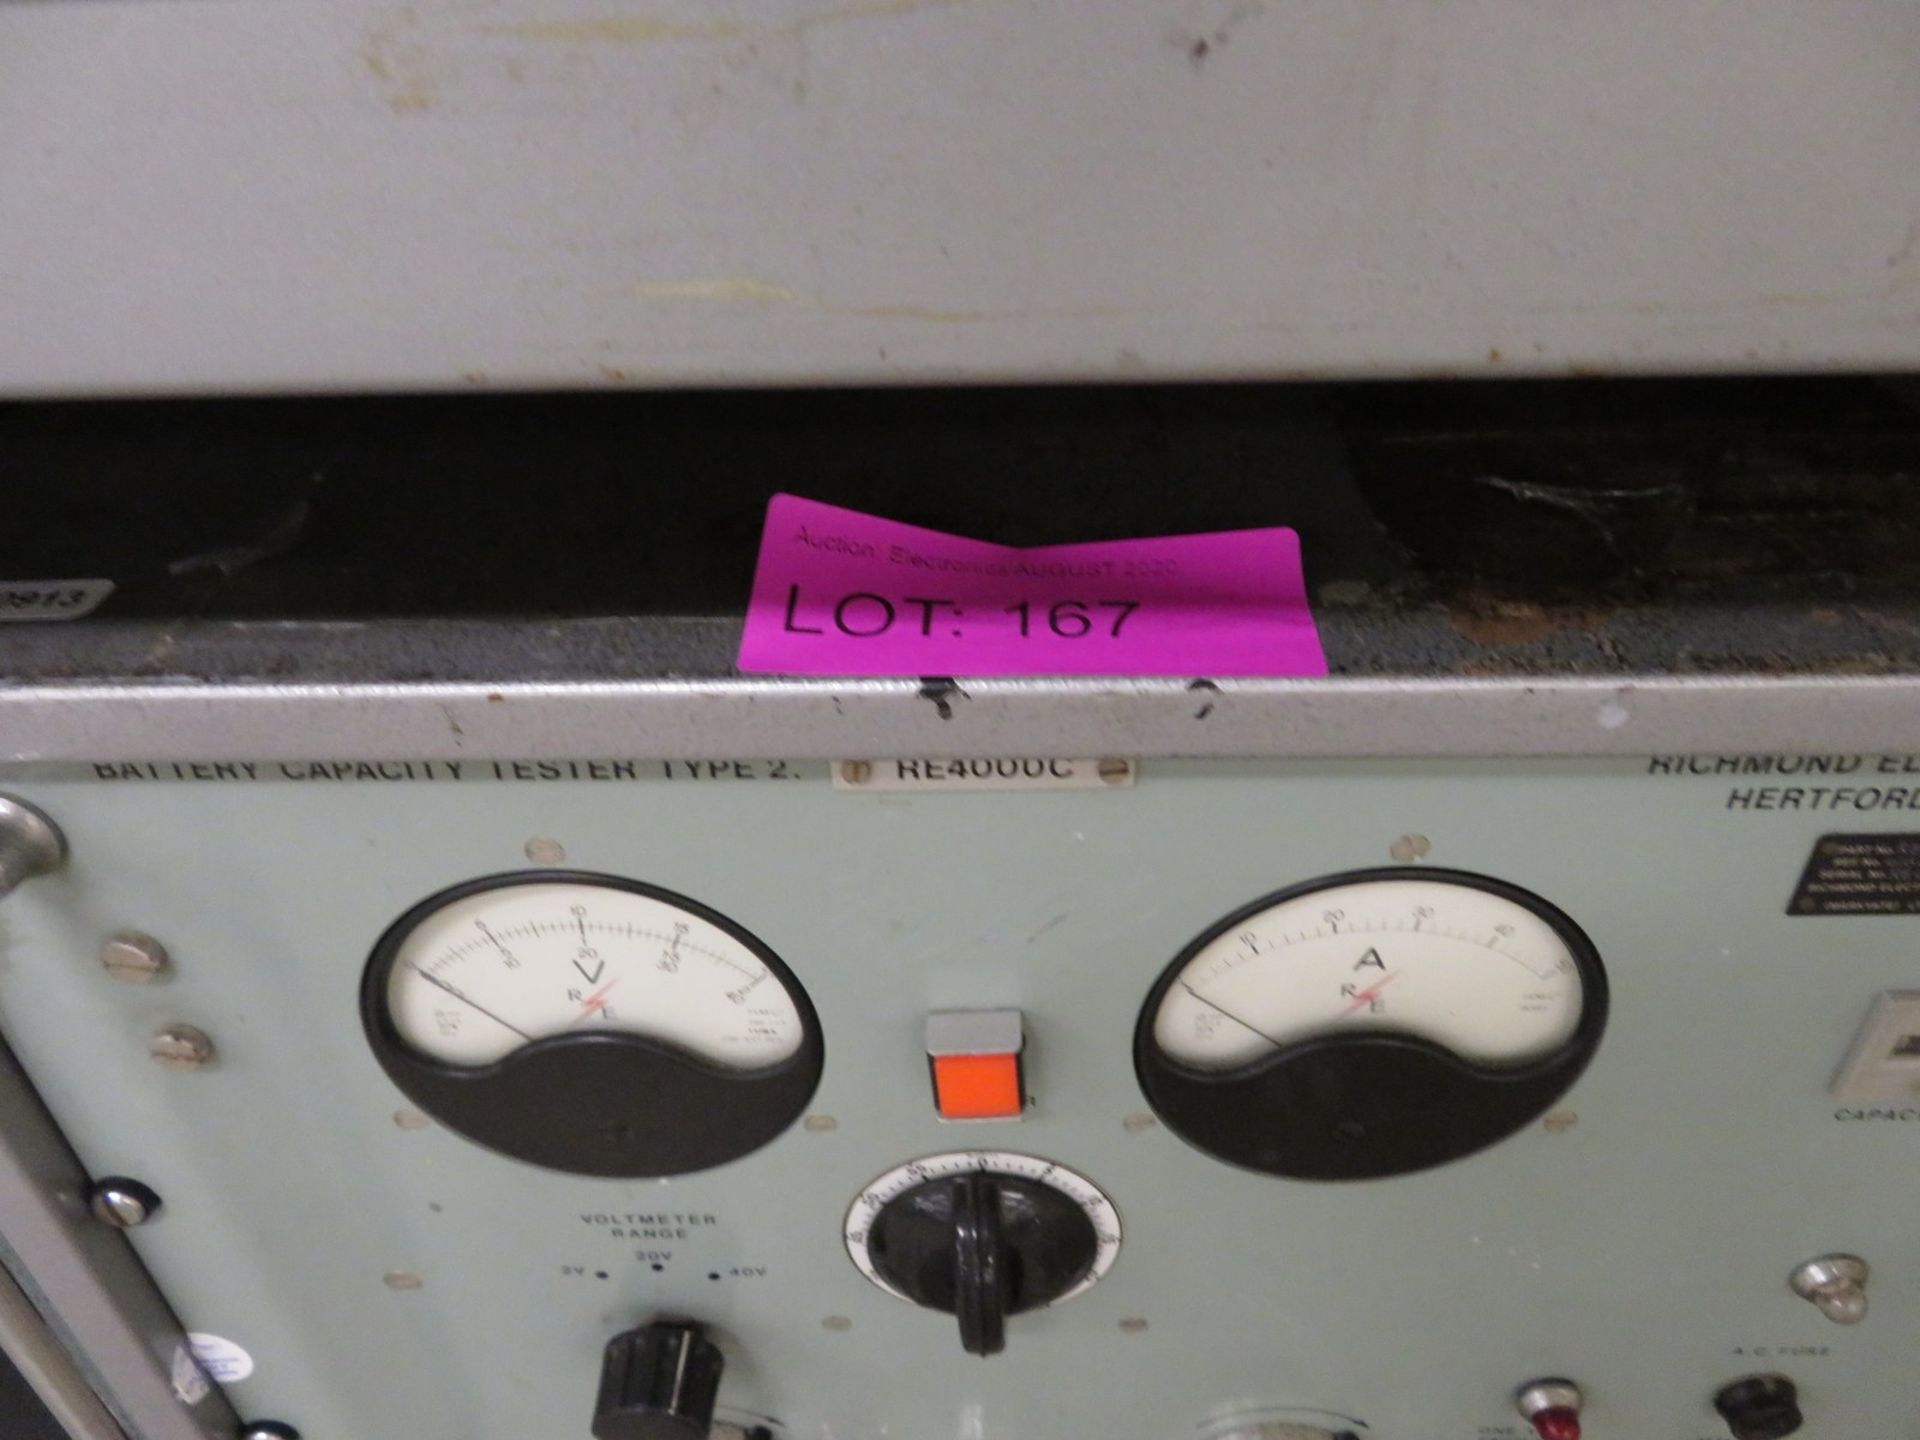 Richmond Electronics RE4000C battery capacity tester type 2 - Image 3 of 3